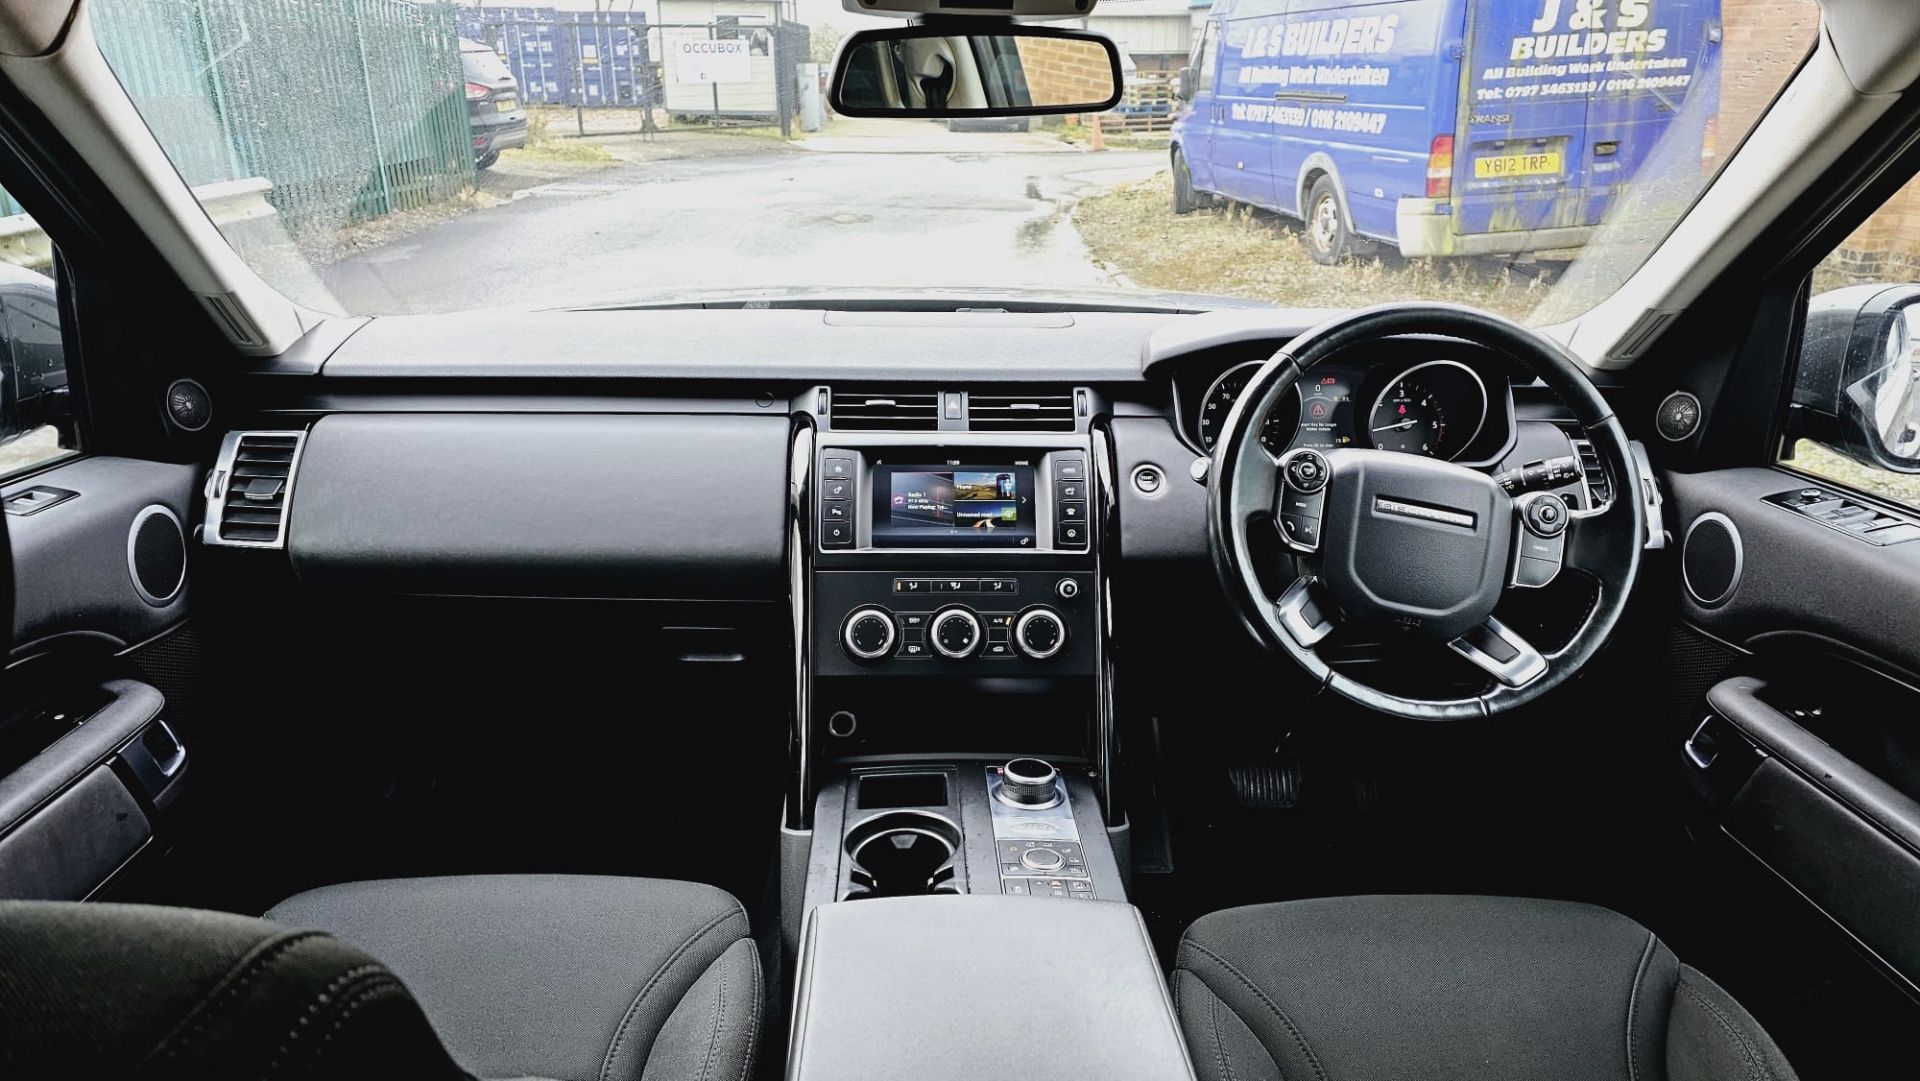 Land Rover Discovery 5 - (New Model) Diesel Auto - 2018 Model - Black Pack Edition - Sat Nav - Look - Image 22 of 45